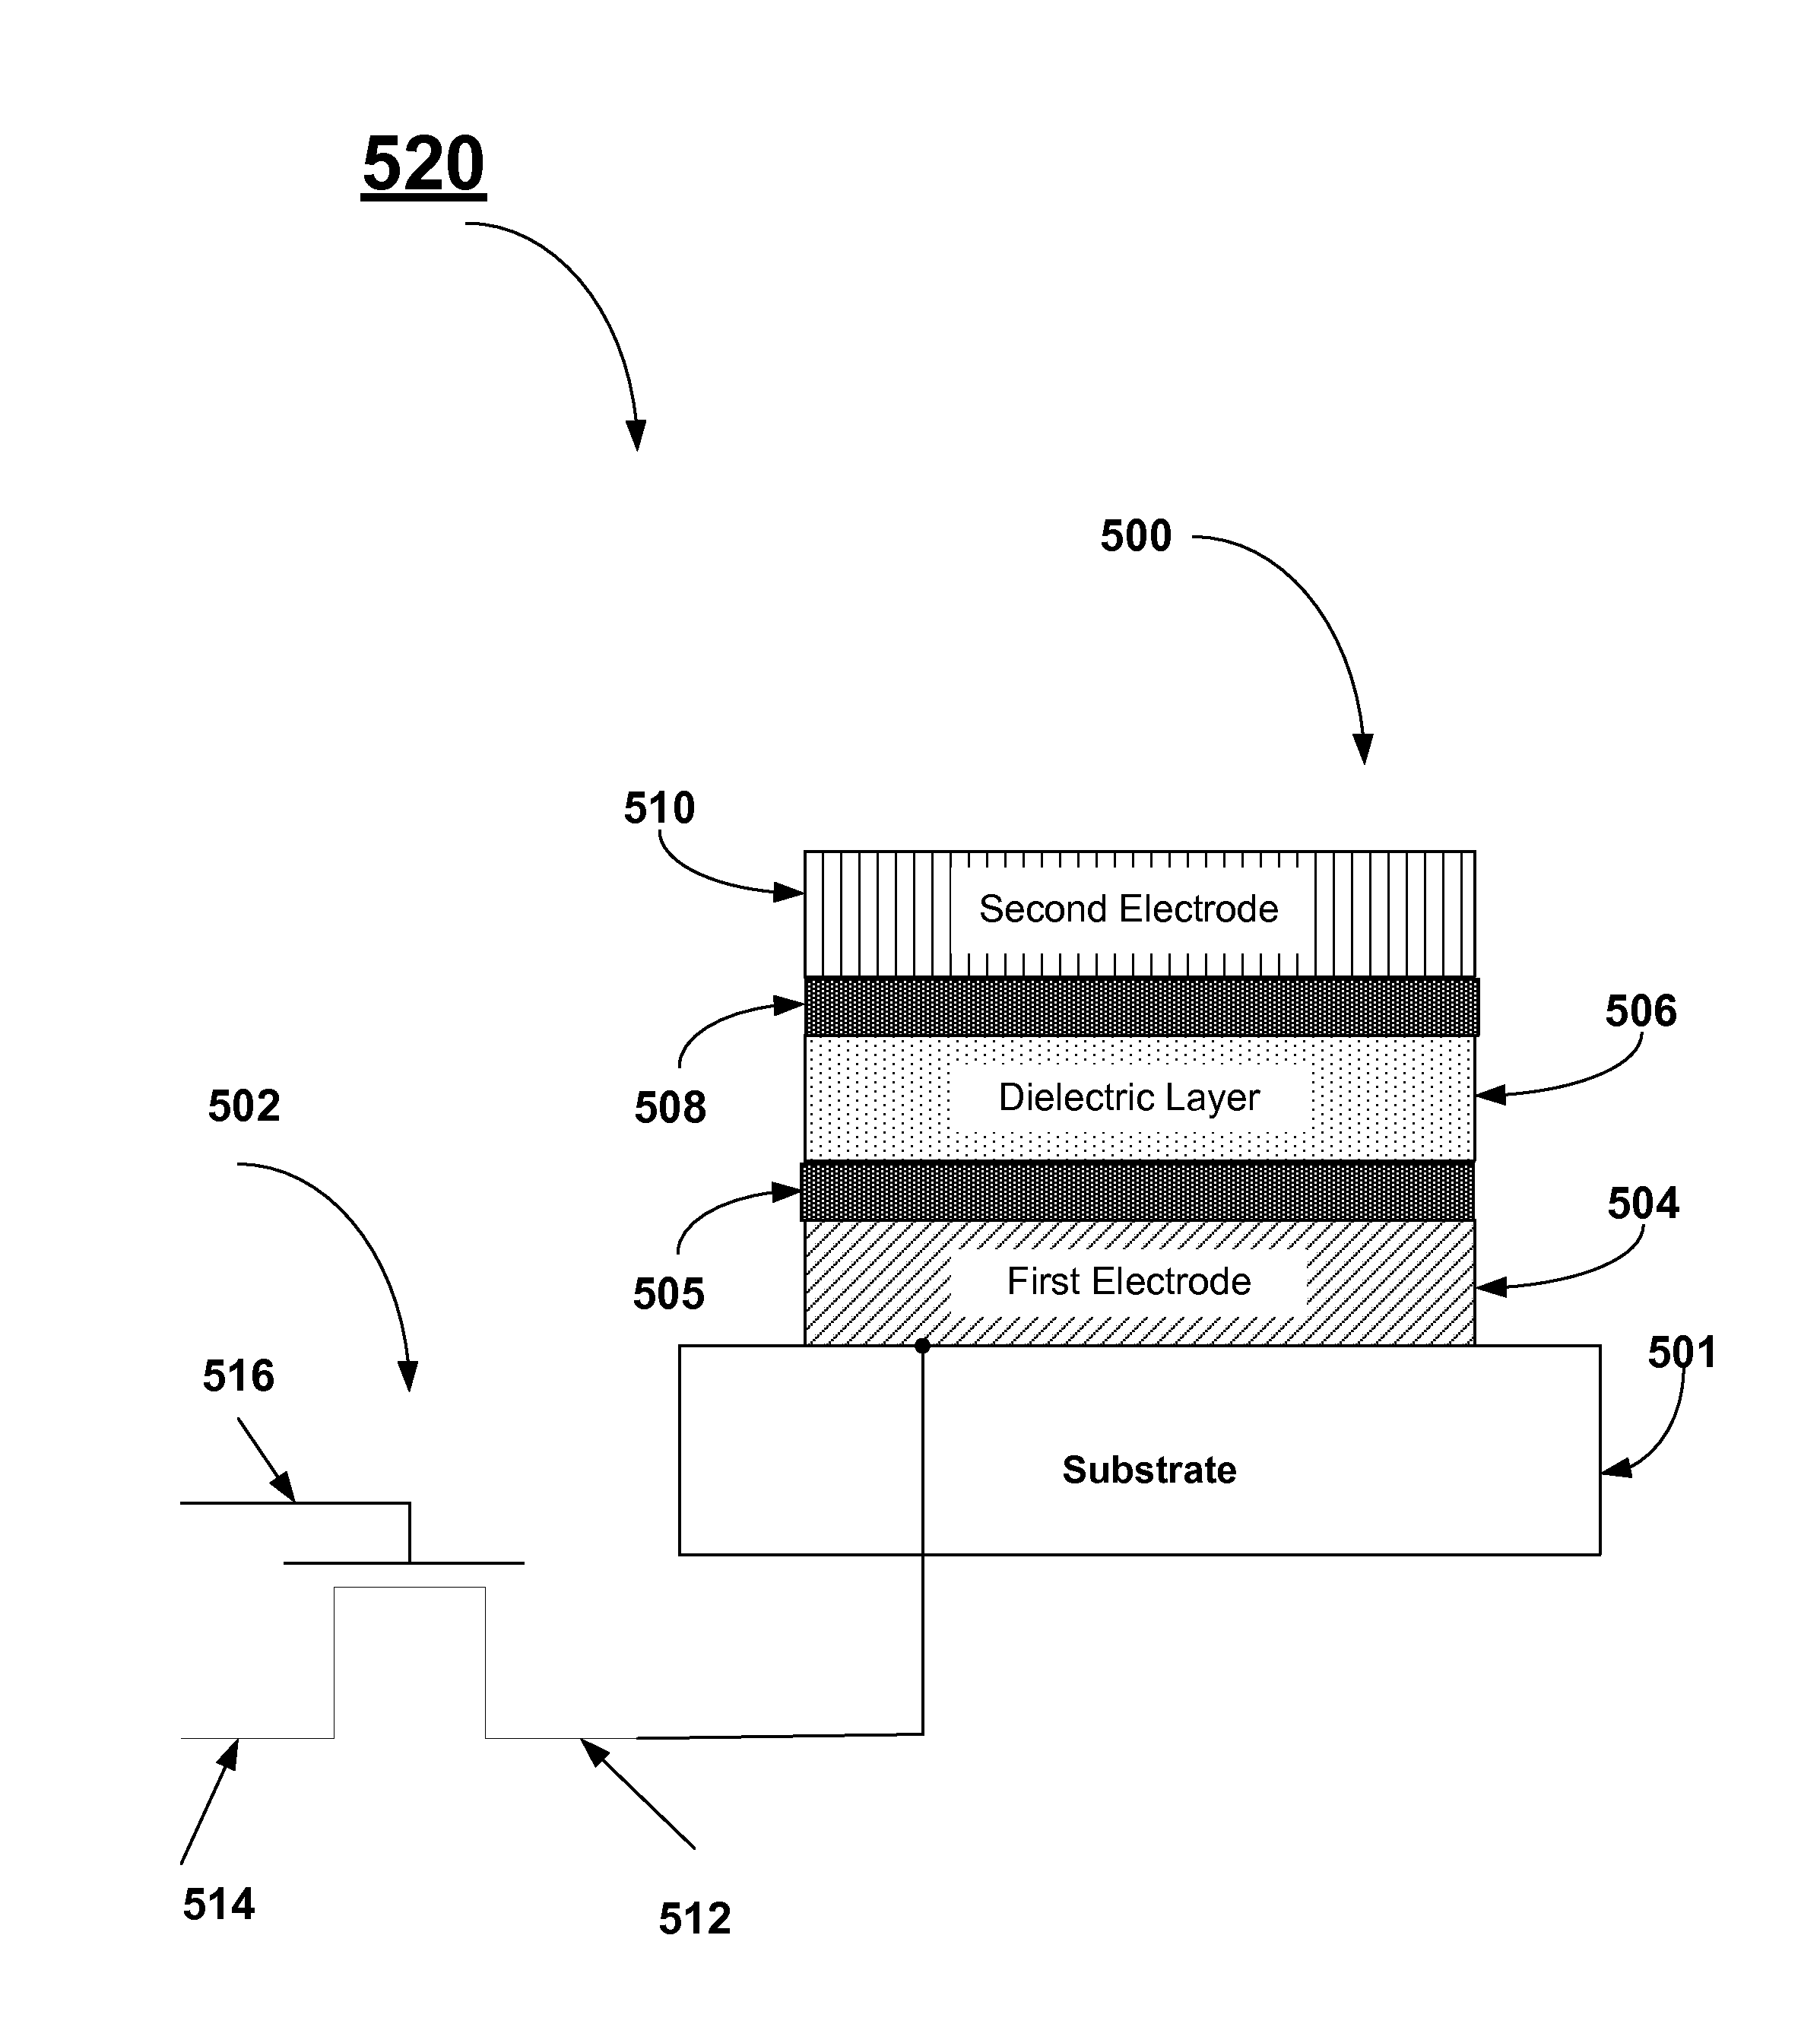 Interfacial layer for dram capacitor